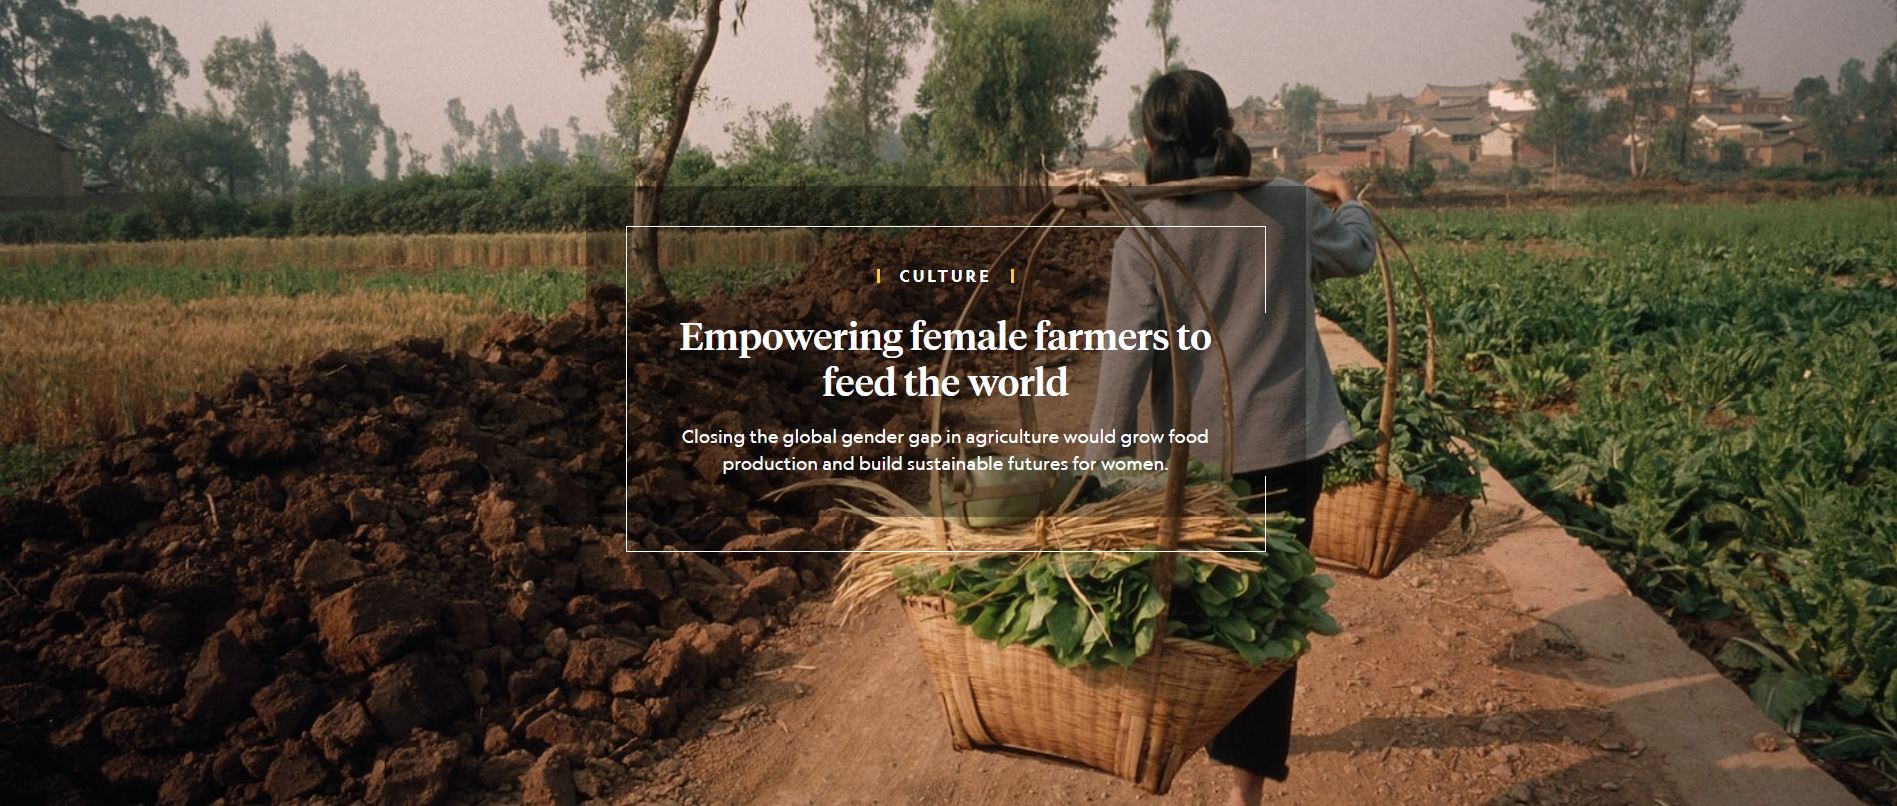 A woman carries freshly harvested produce on her back down a path in a field. Overlaying text reads "Empowering female farmers to feed the world."